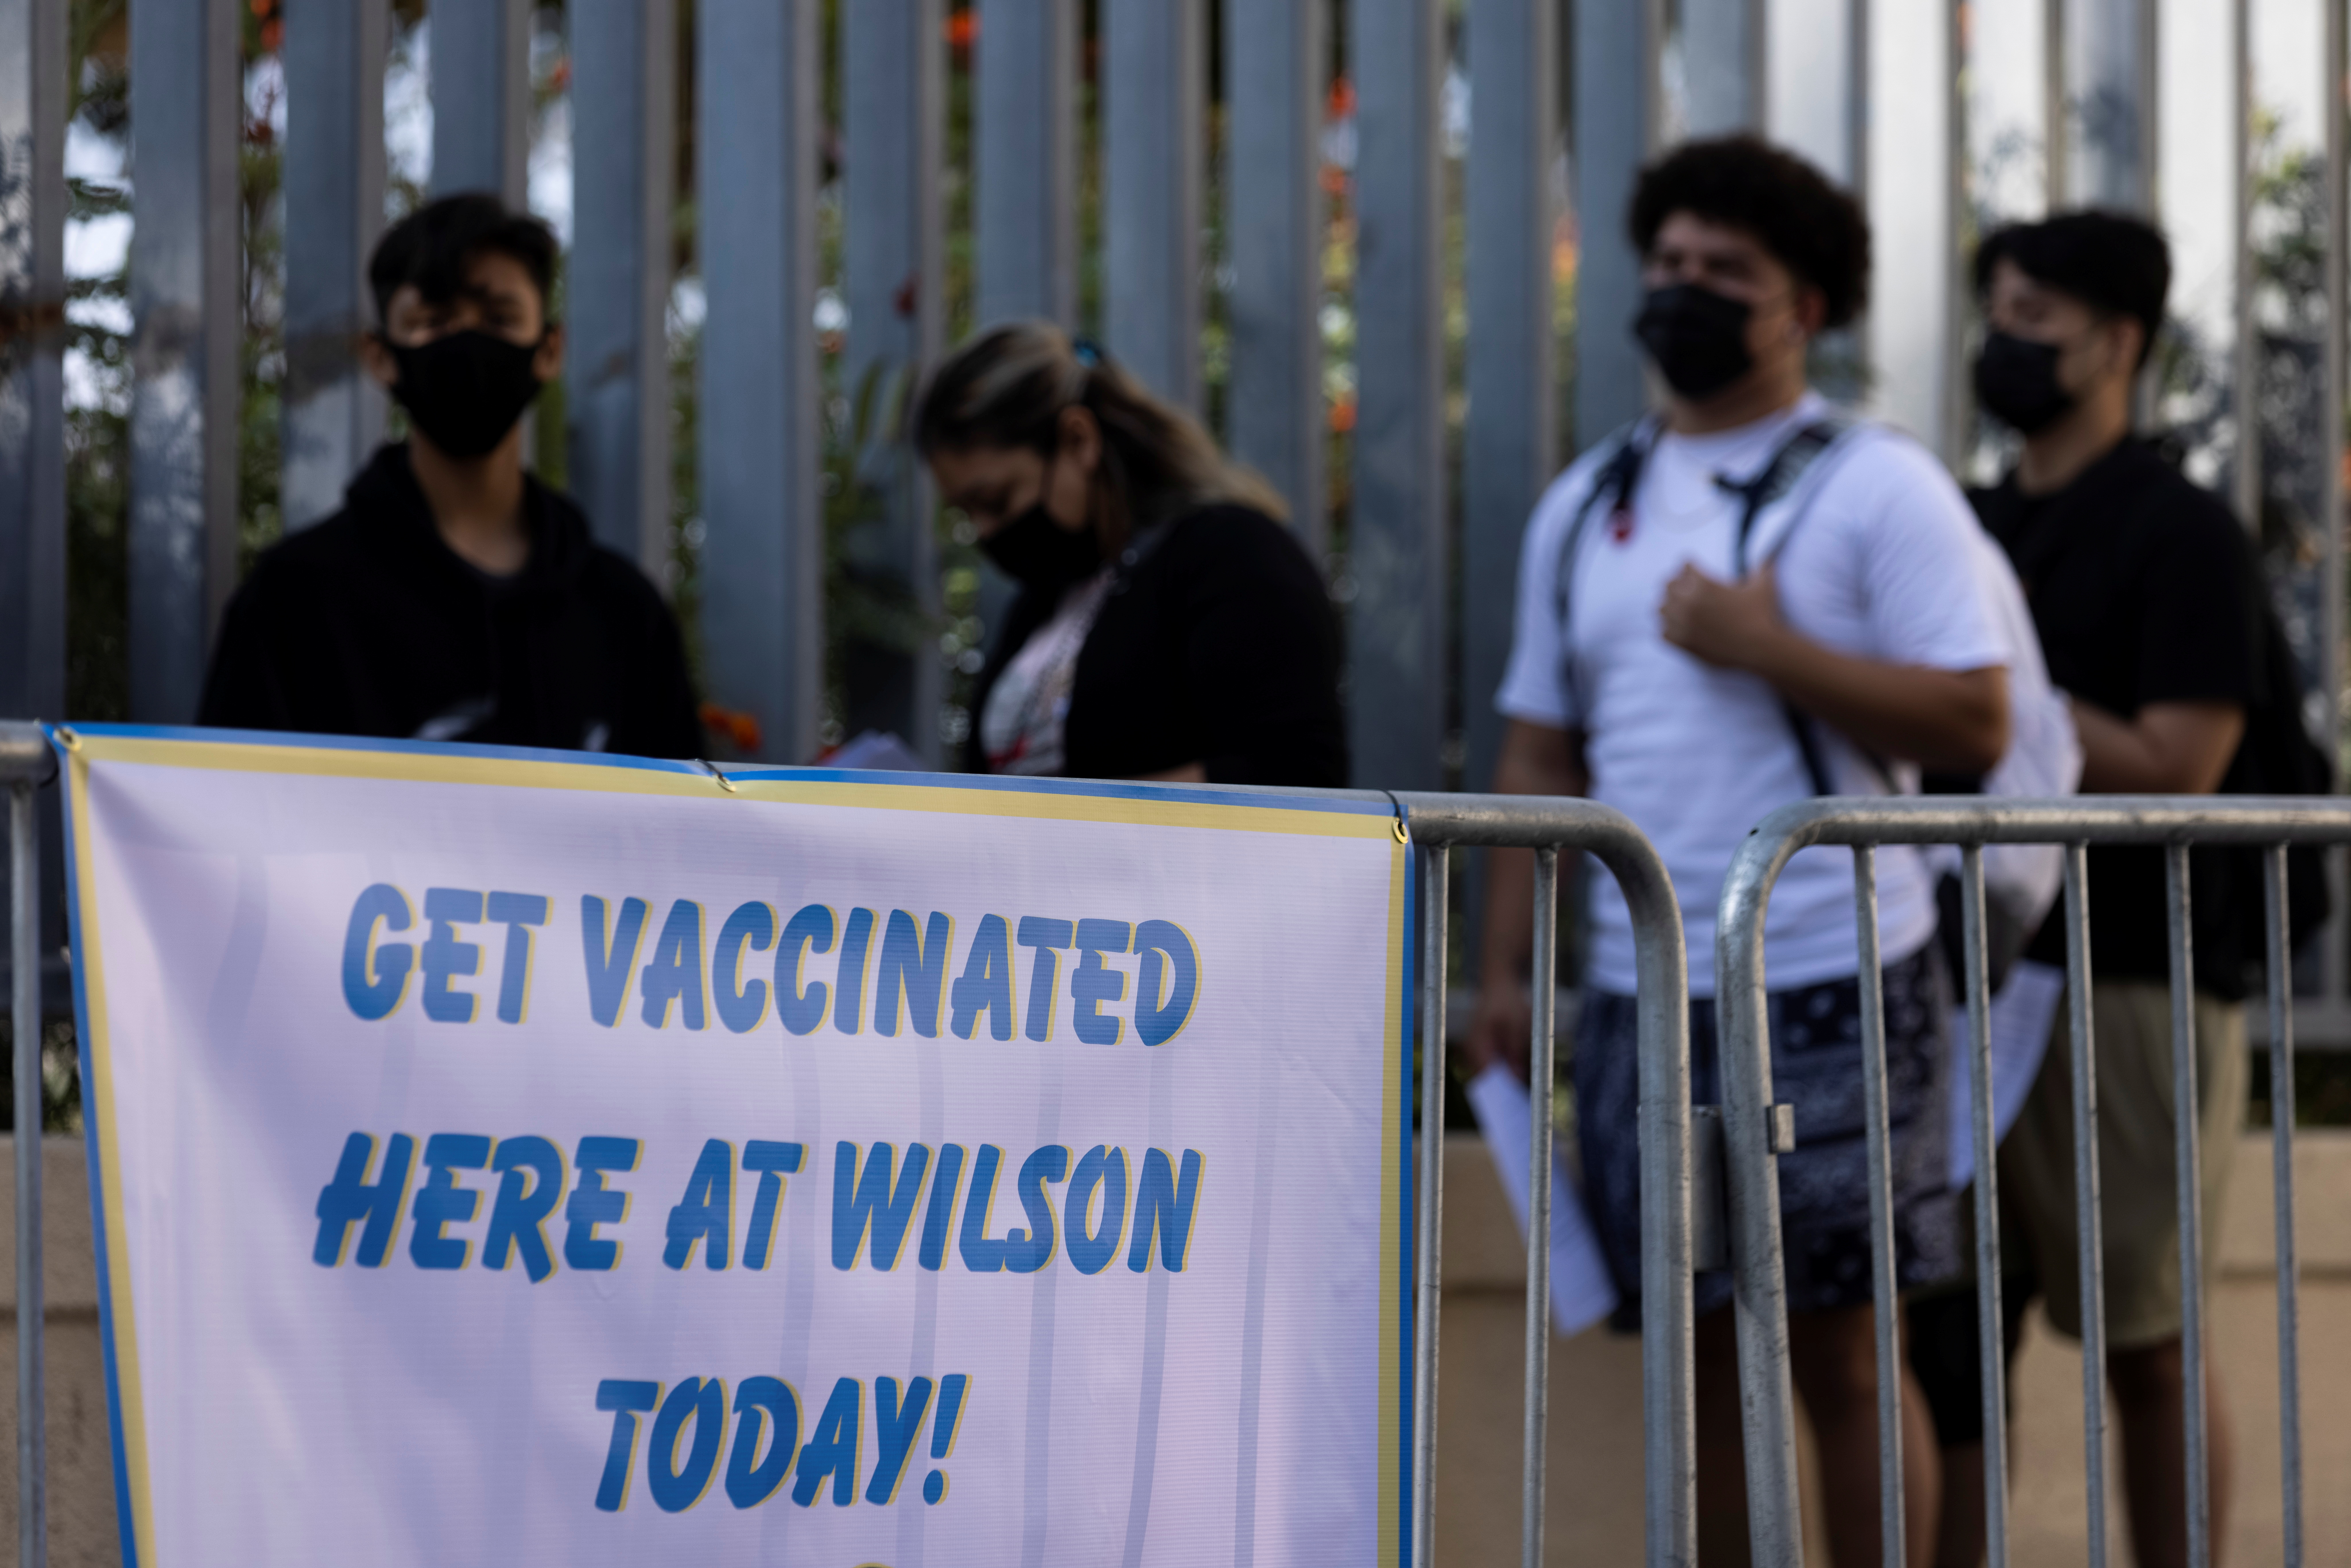 Mobile vaccination teams begin visiting Los Angeles schools to vaccinate middle and high school students